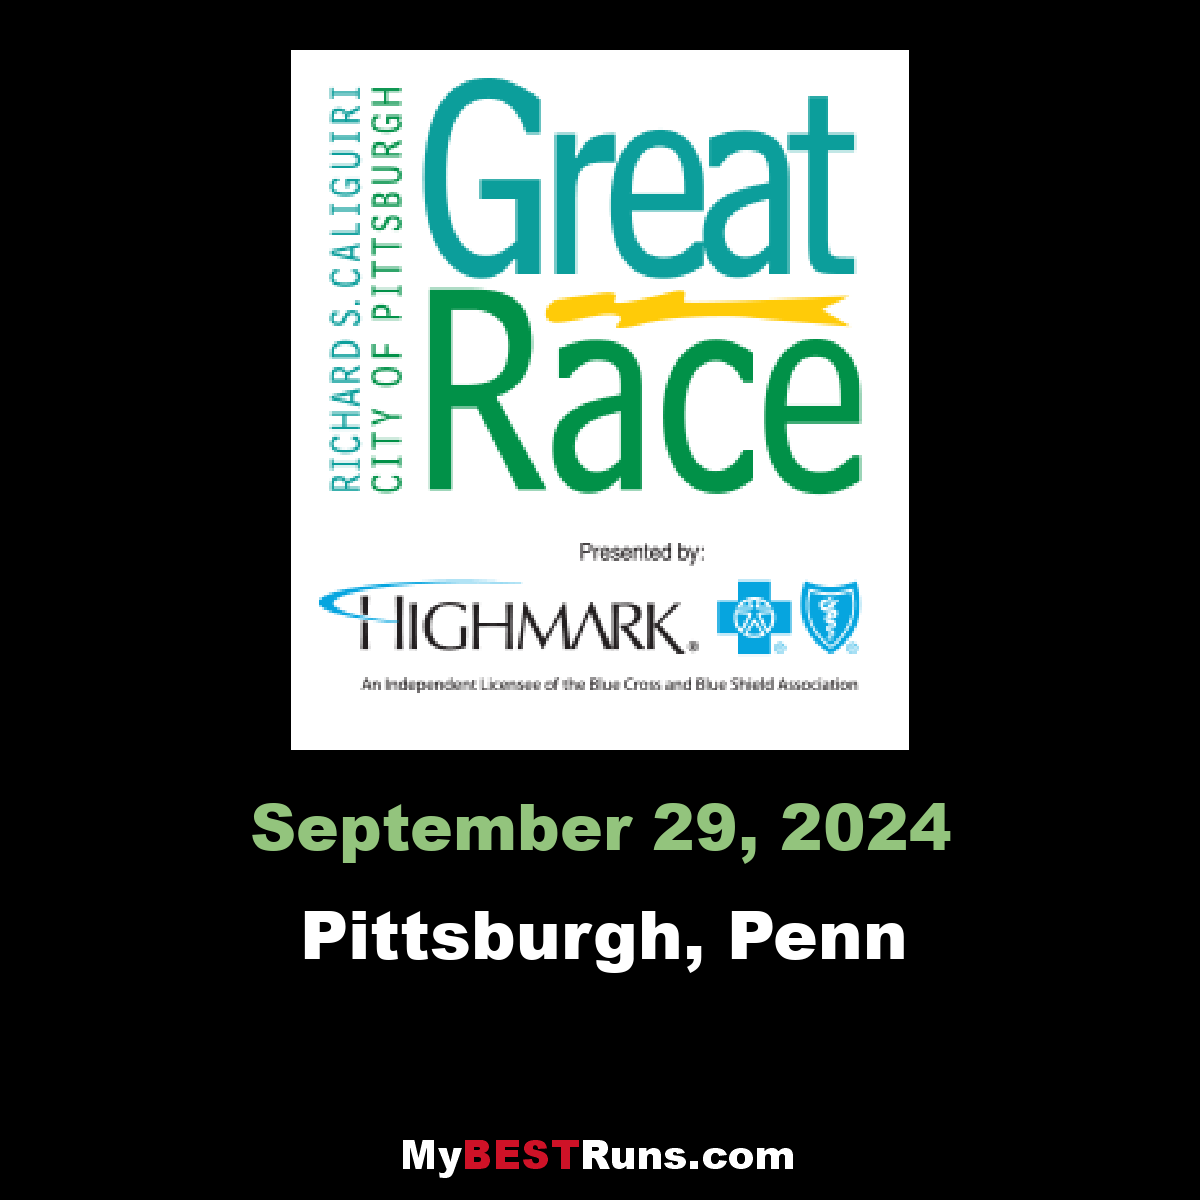 City of Pittsburgh Great Race